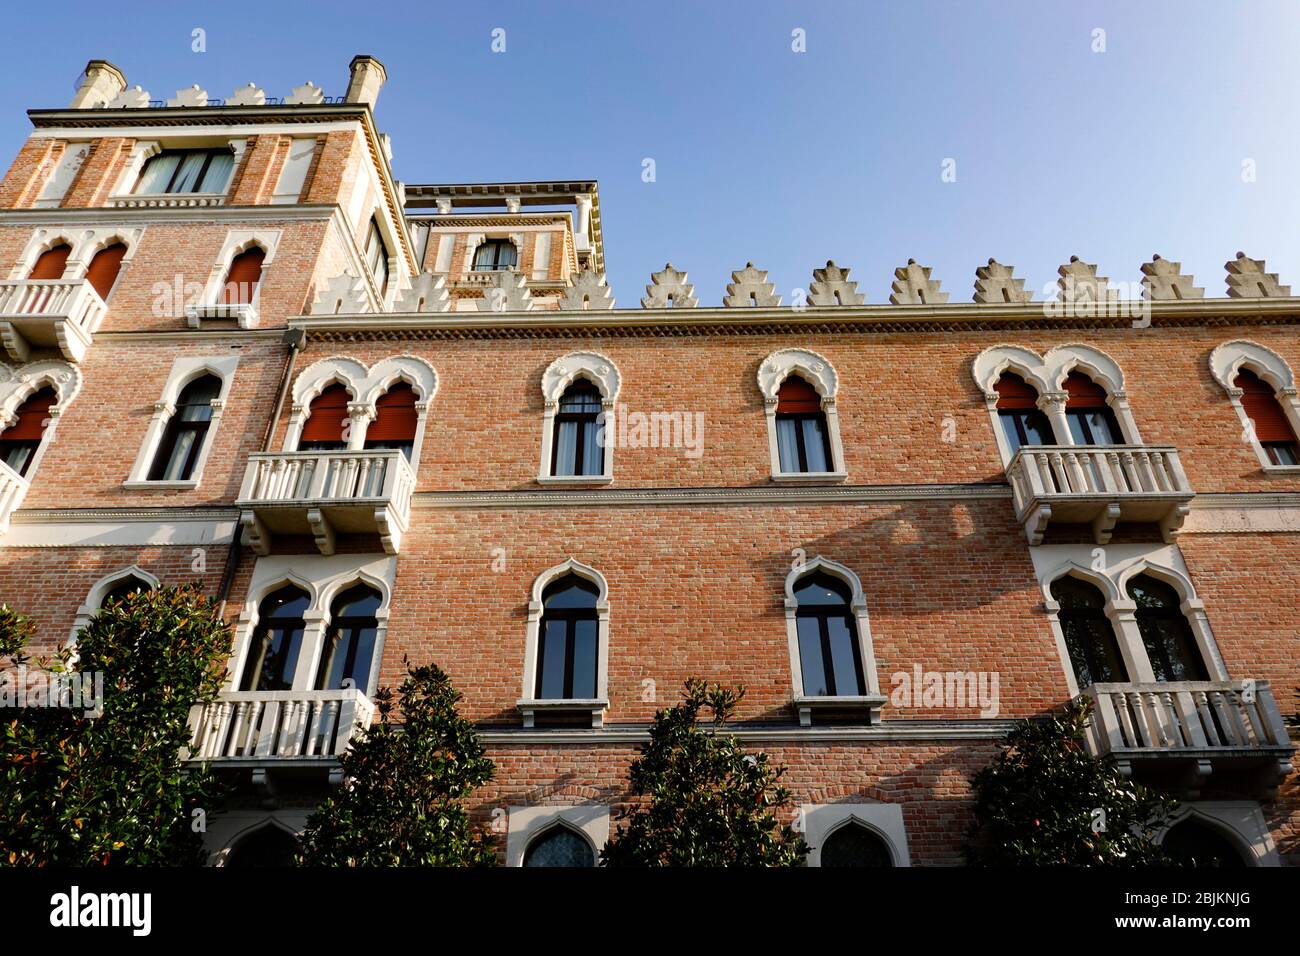 Hotel Excelsior, The Lido, Venice, Italy. Stock Photo